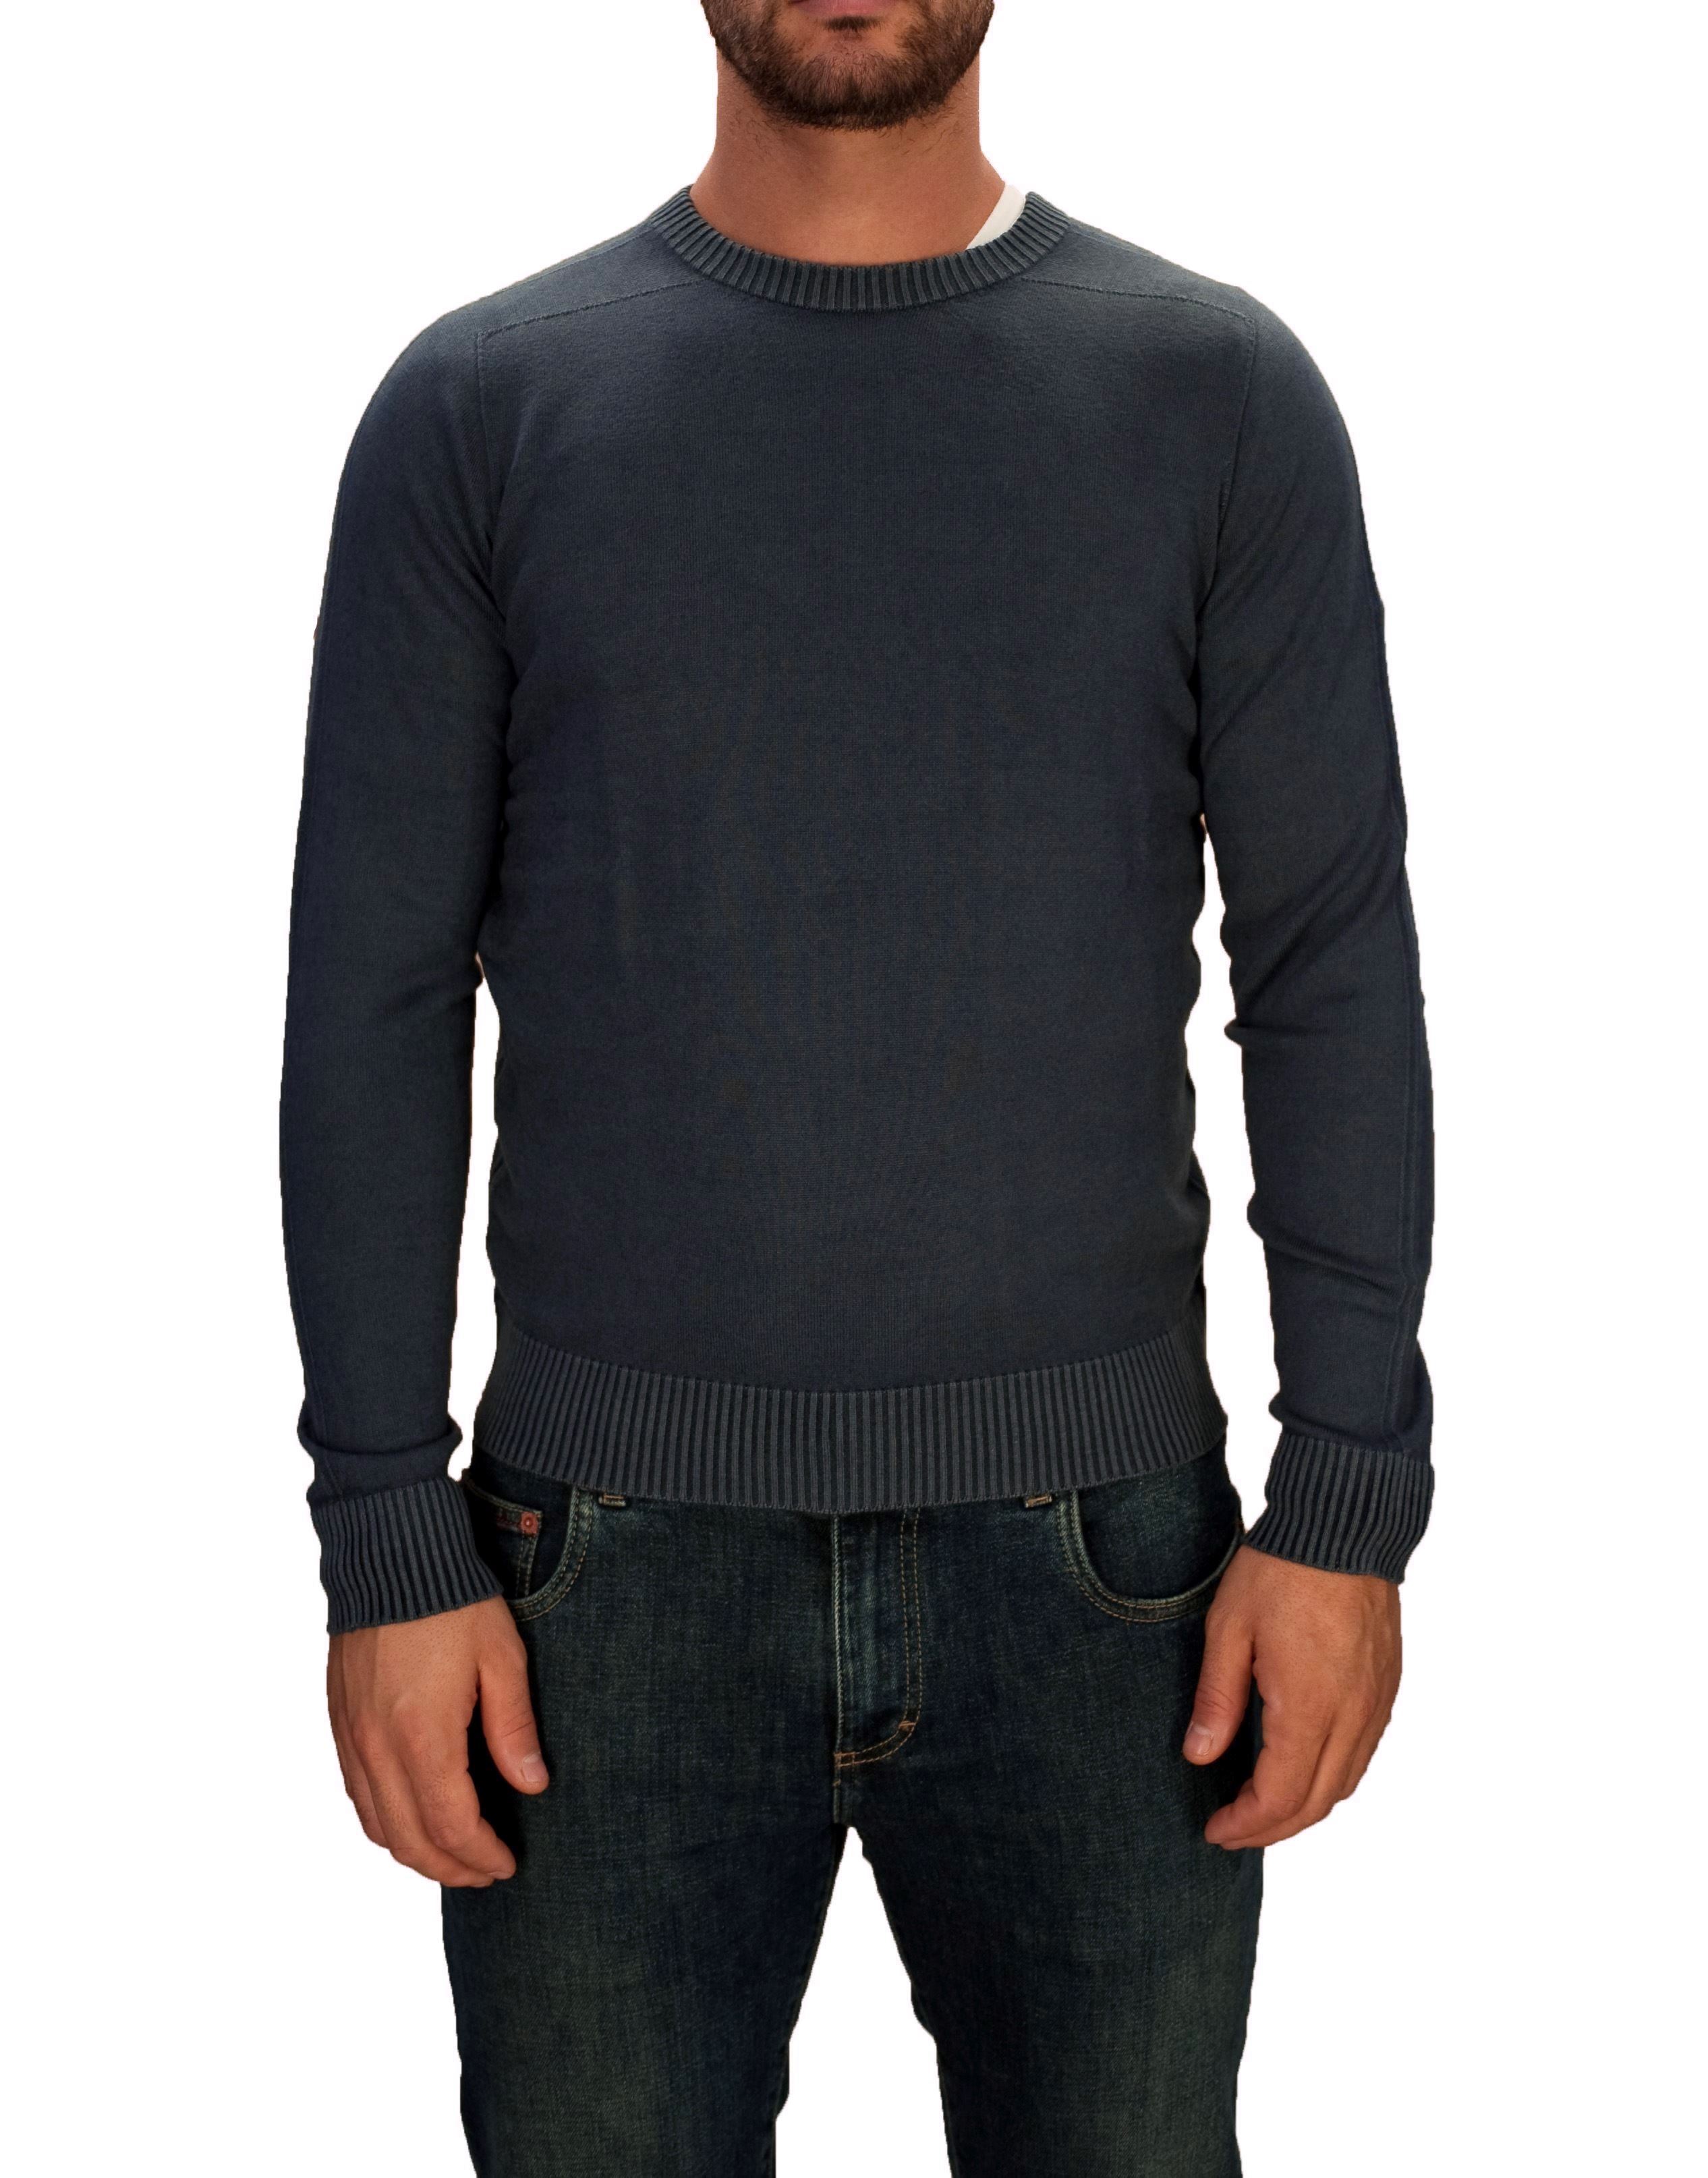 Fly 3 j-class navy blue seamless reversible wool sweater - Floccari Store